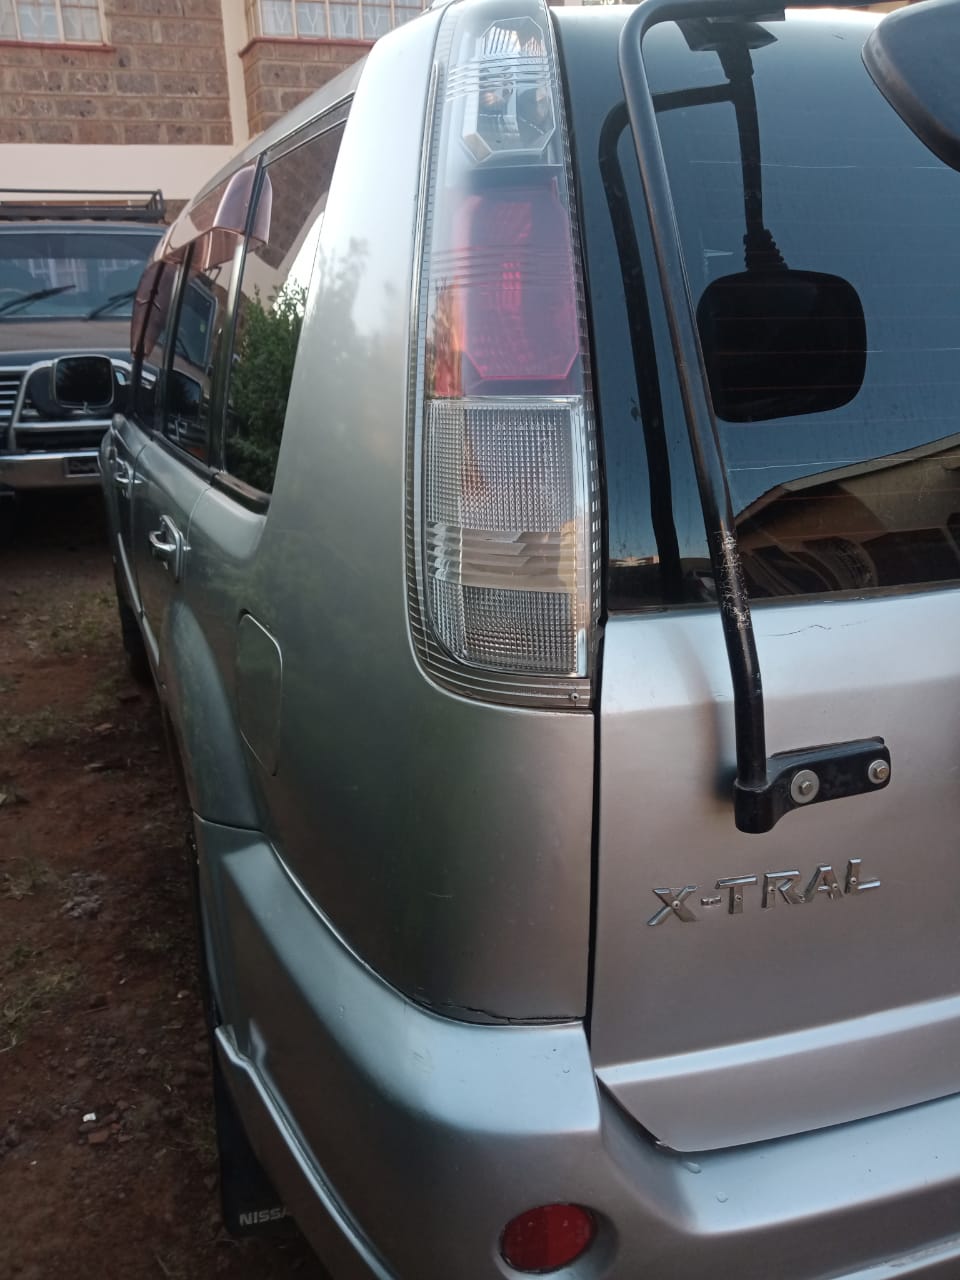 Nissan XTRAIL KBT 480K ONLY You Pay 30% Deposit Trade in Ok Wow!